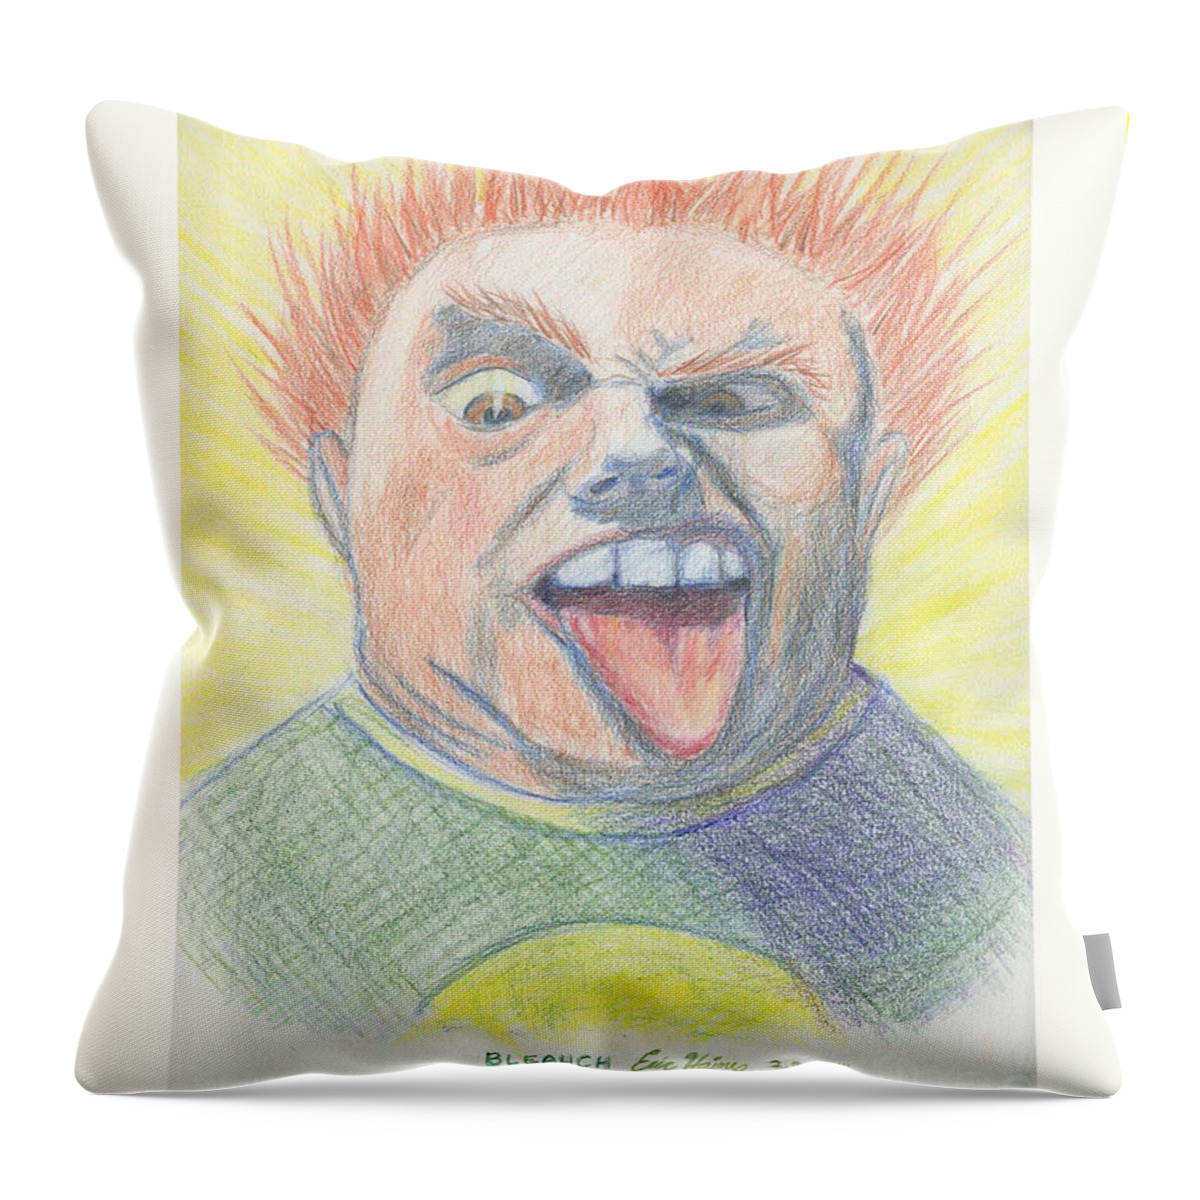 Funny Throw Pillow featuring the drawing Bleahch by Eric Haines